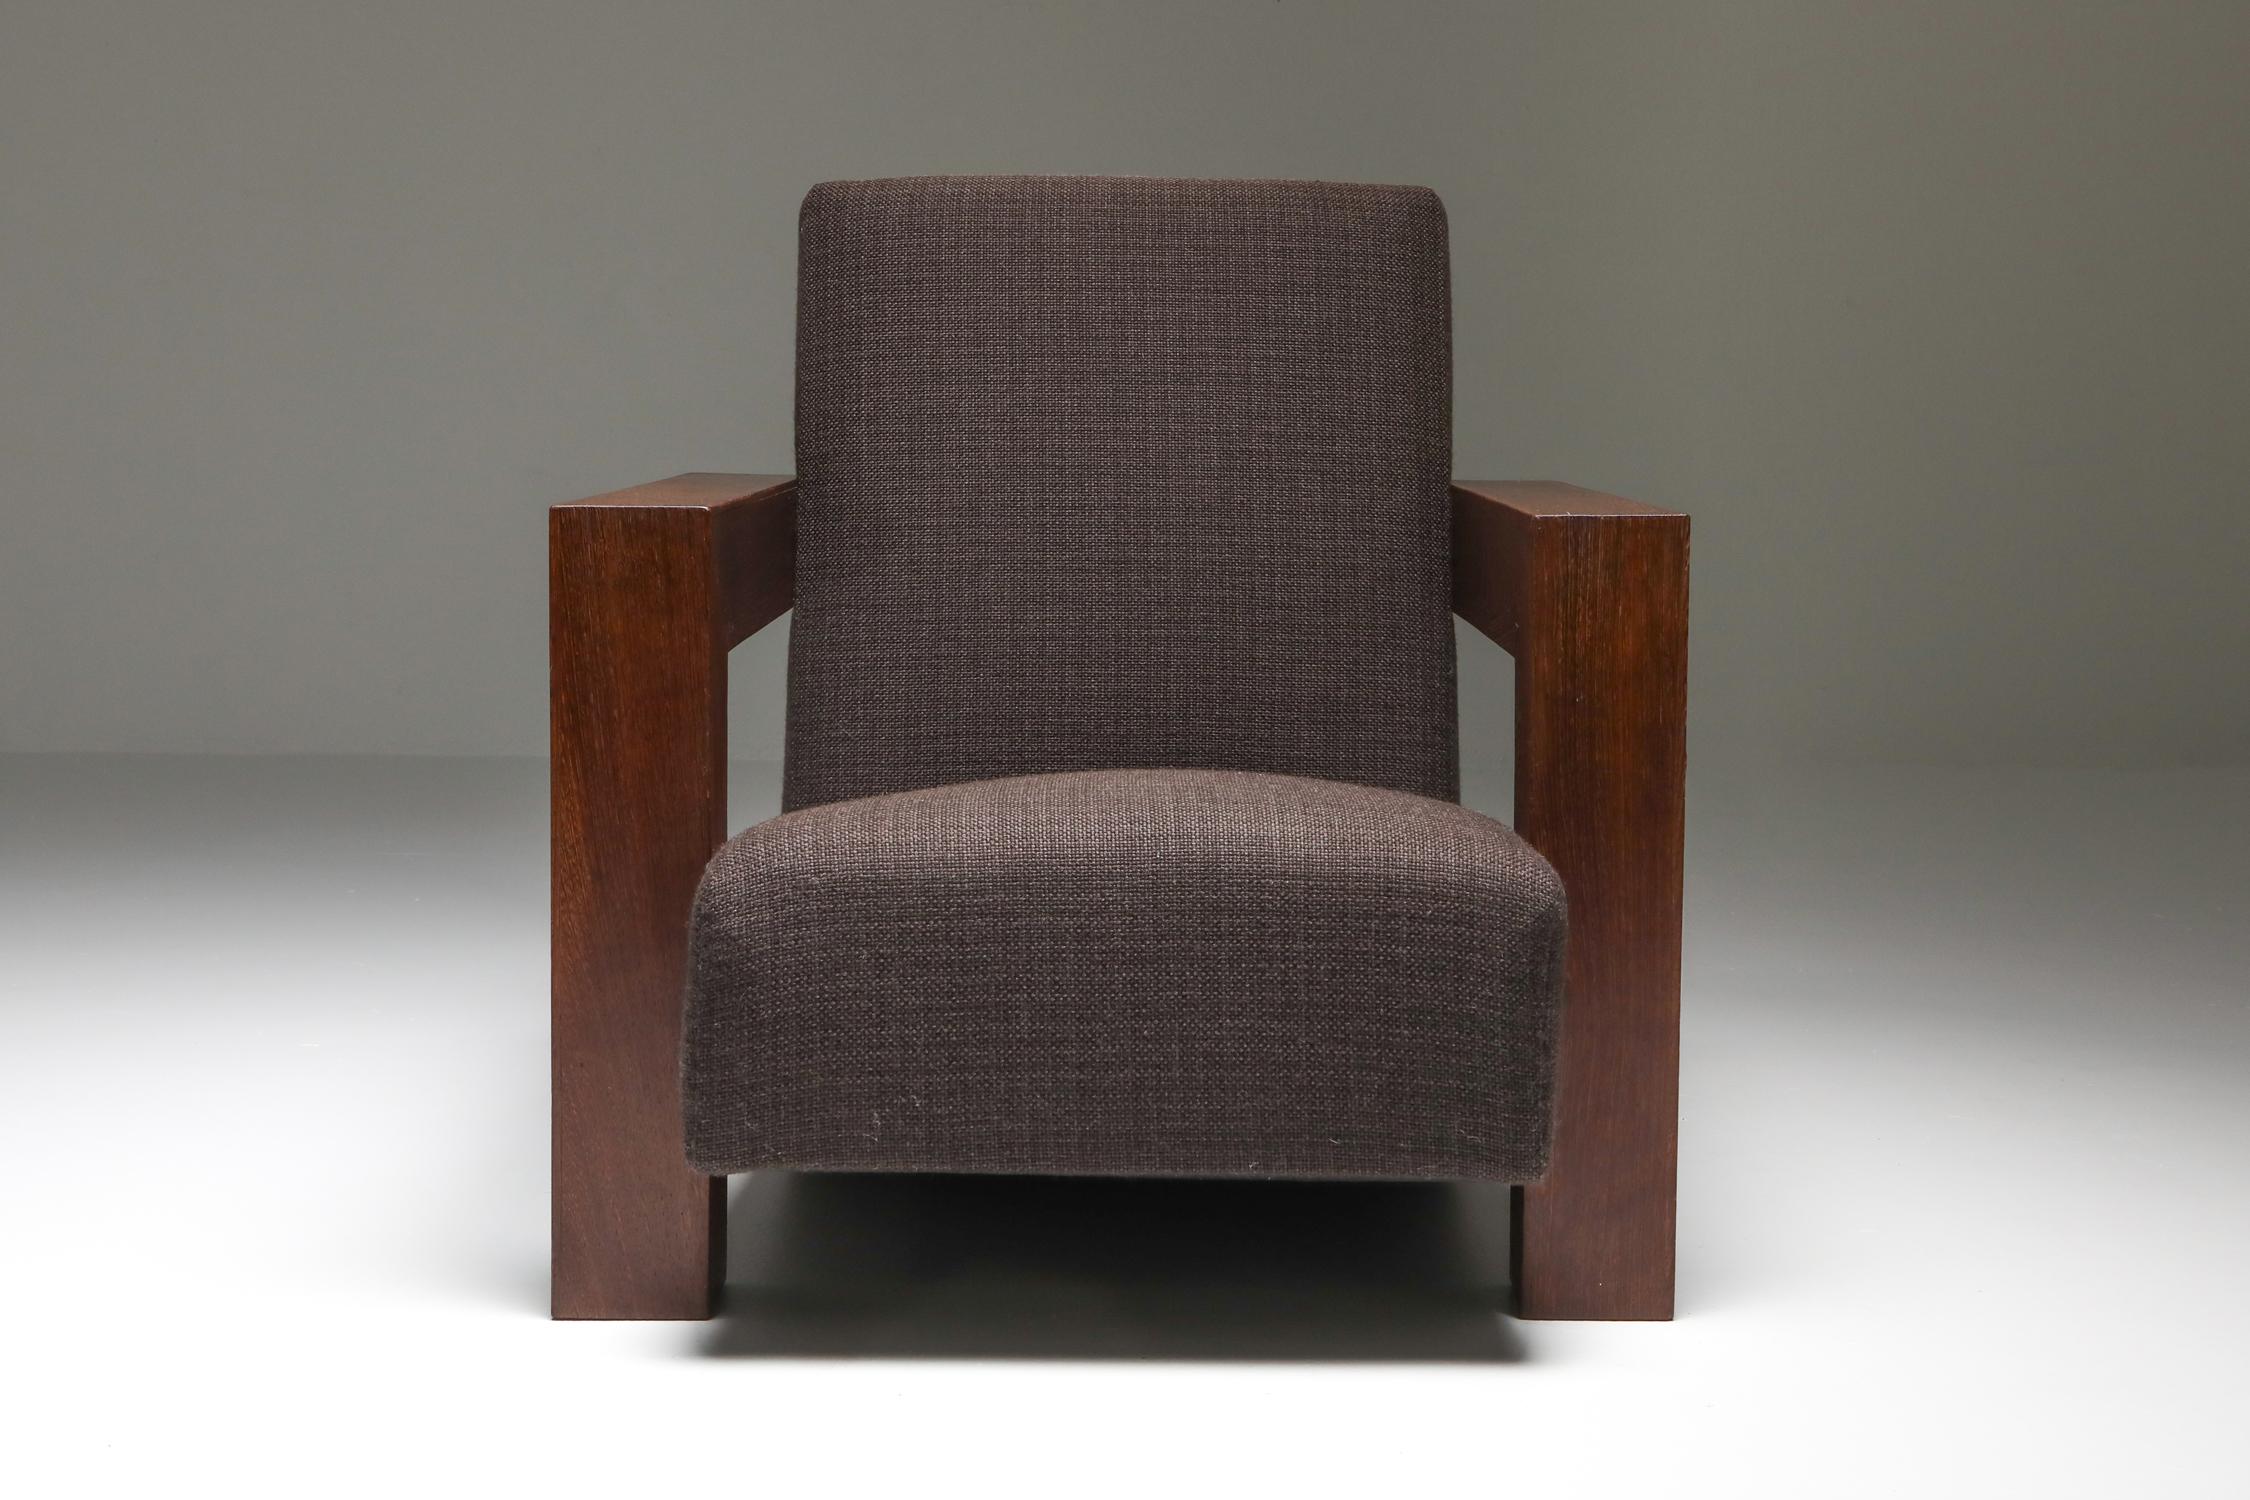 Fabric Rietveld's Utrecht Chair with a Wooden Frame, a Pair